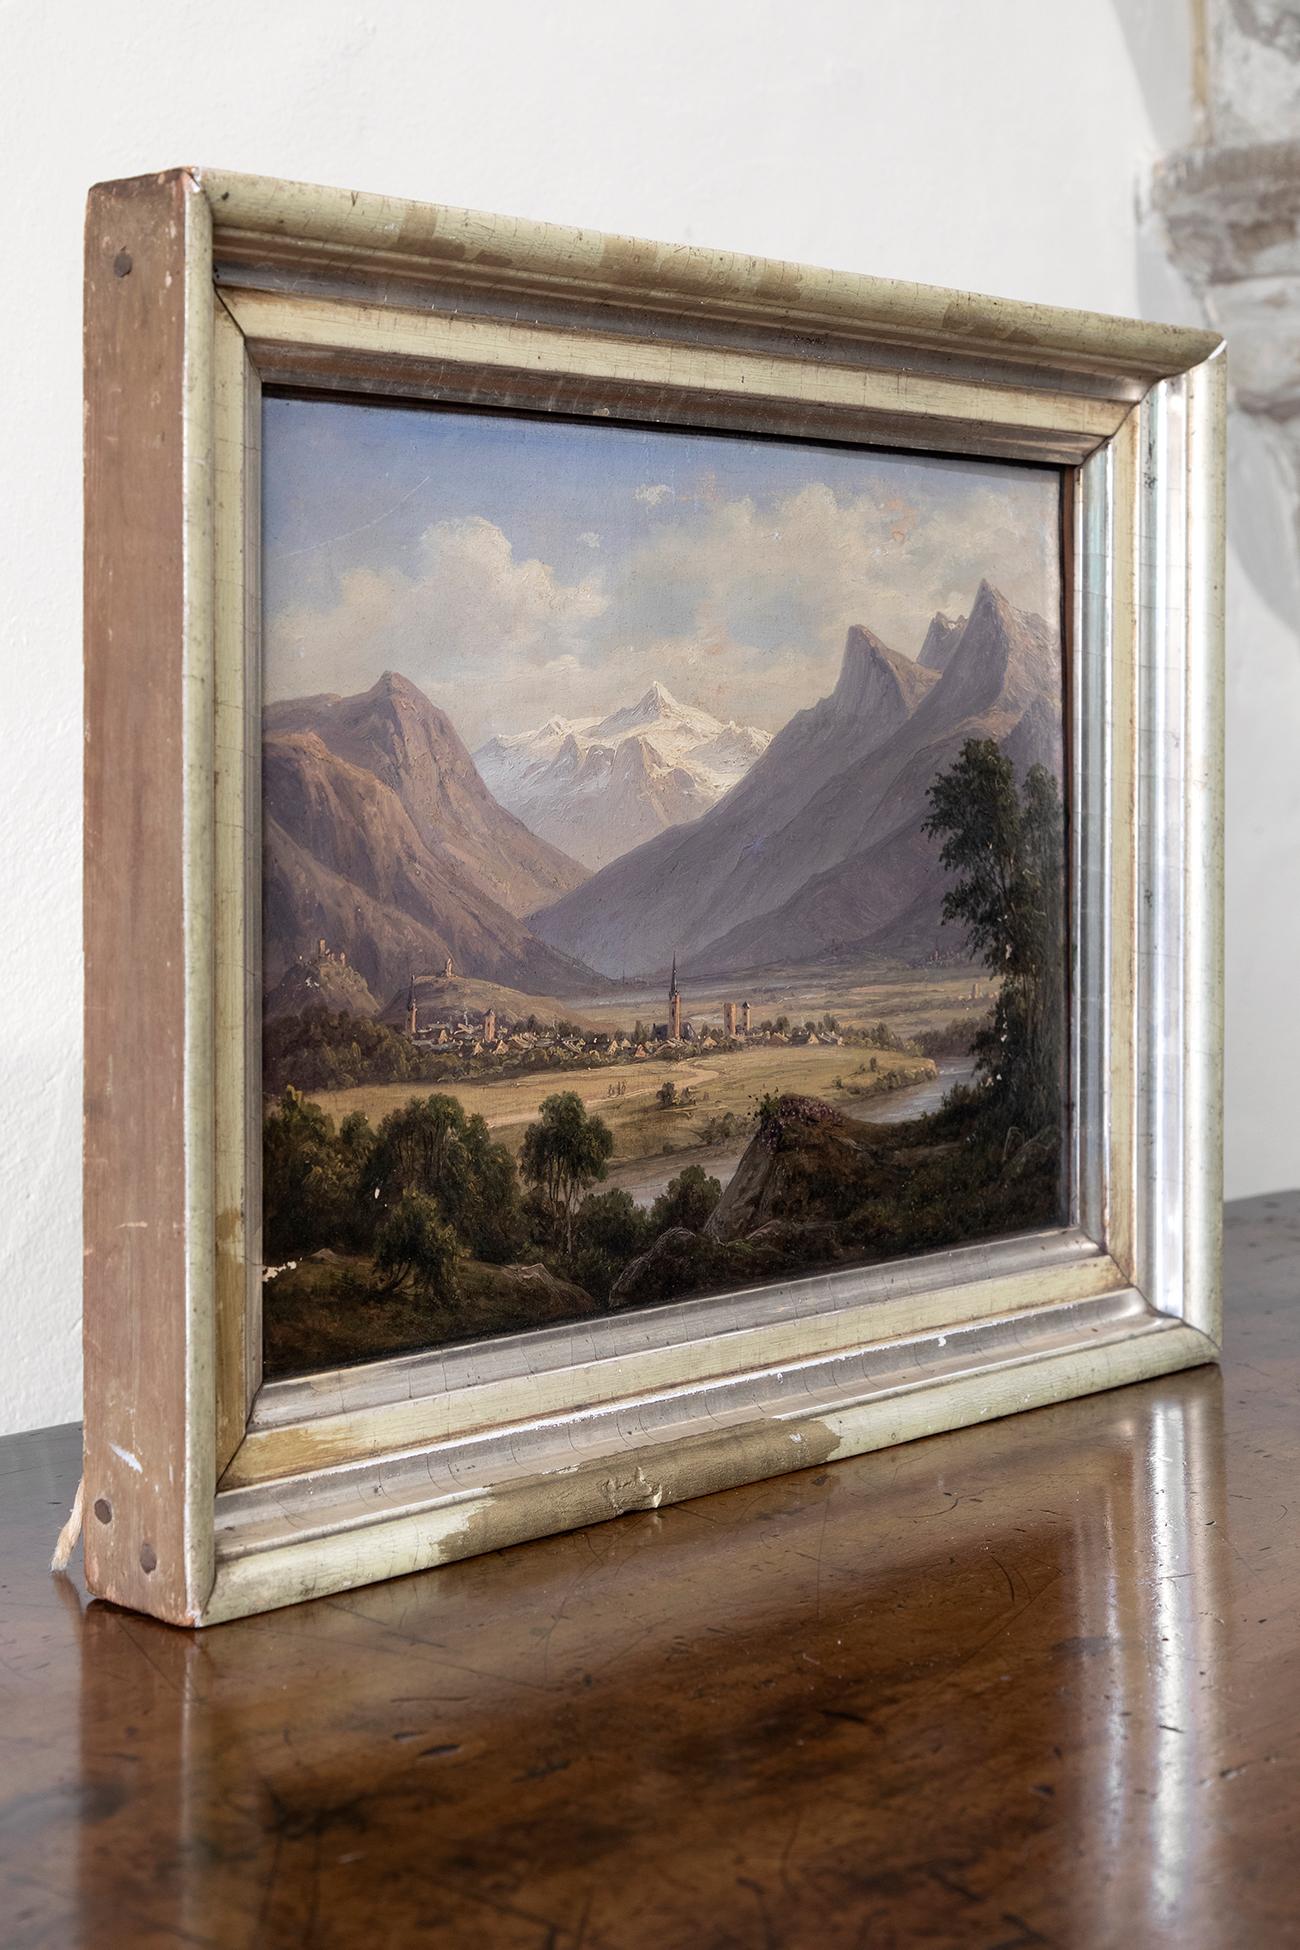 Enchanting 19th Century original oil on canvas, depicting a captivating view of the Tyrol Mountains in an aged frame. Signed FC Kiærskou and dated 1867 verso with inscription Mals Tyrol.

Additional information:
H 32 cm (H 12.5 inches)
W 41 cm